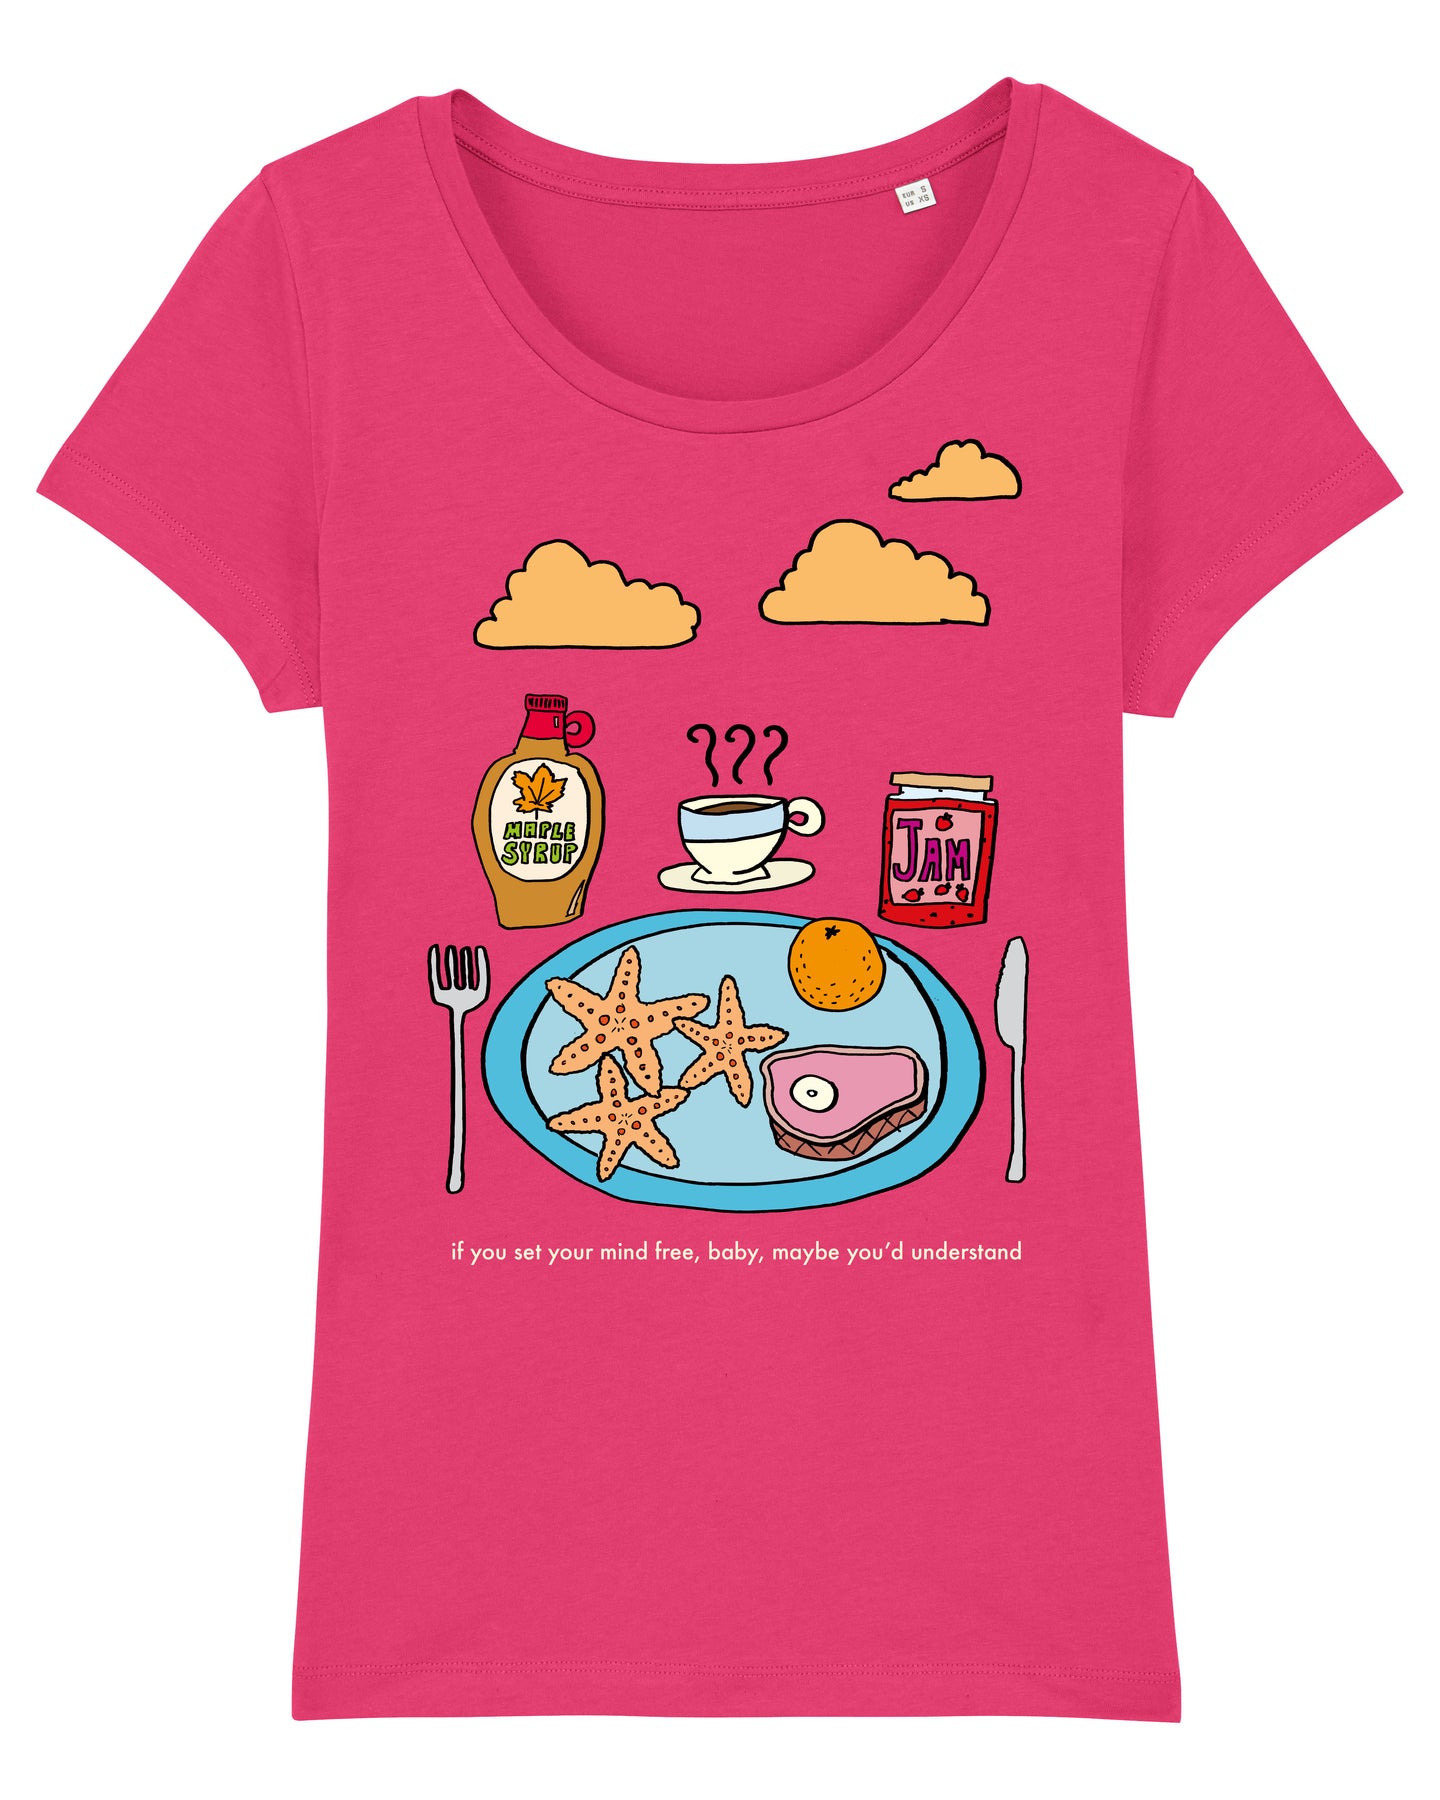 Starfish & Coffee Women's T-Shirt available in grey or raspberry